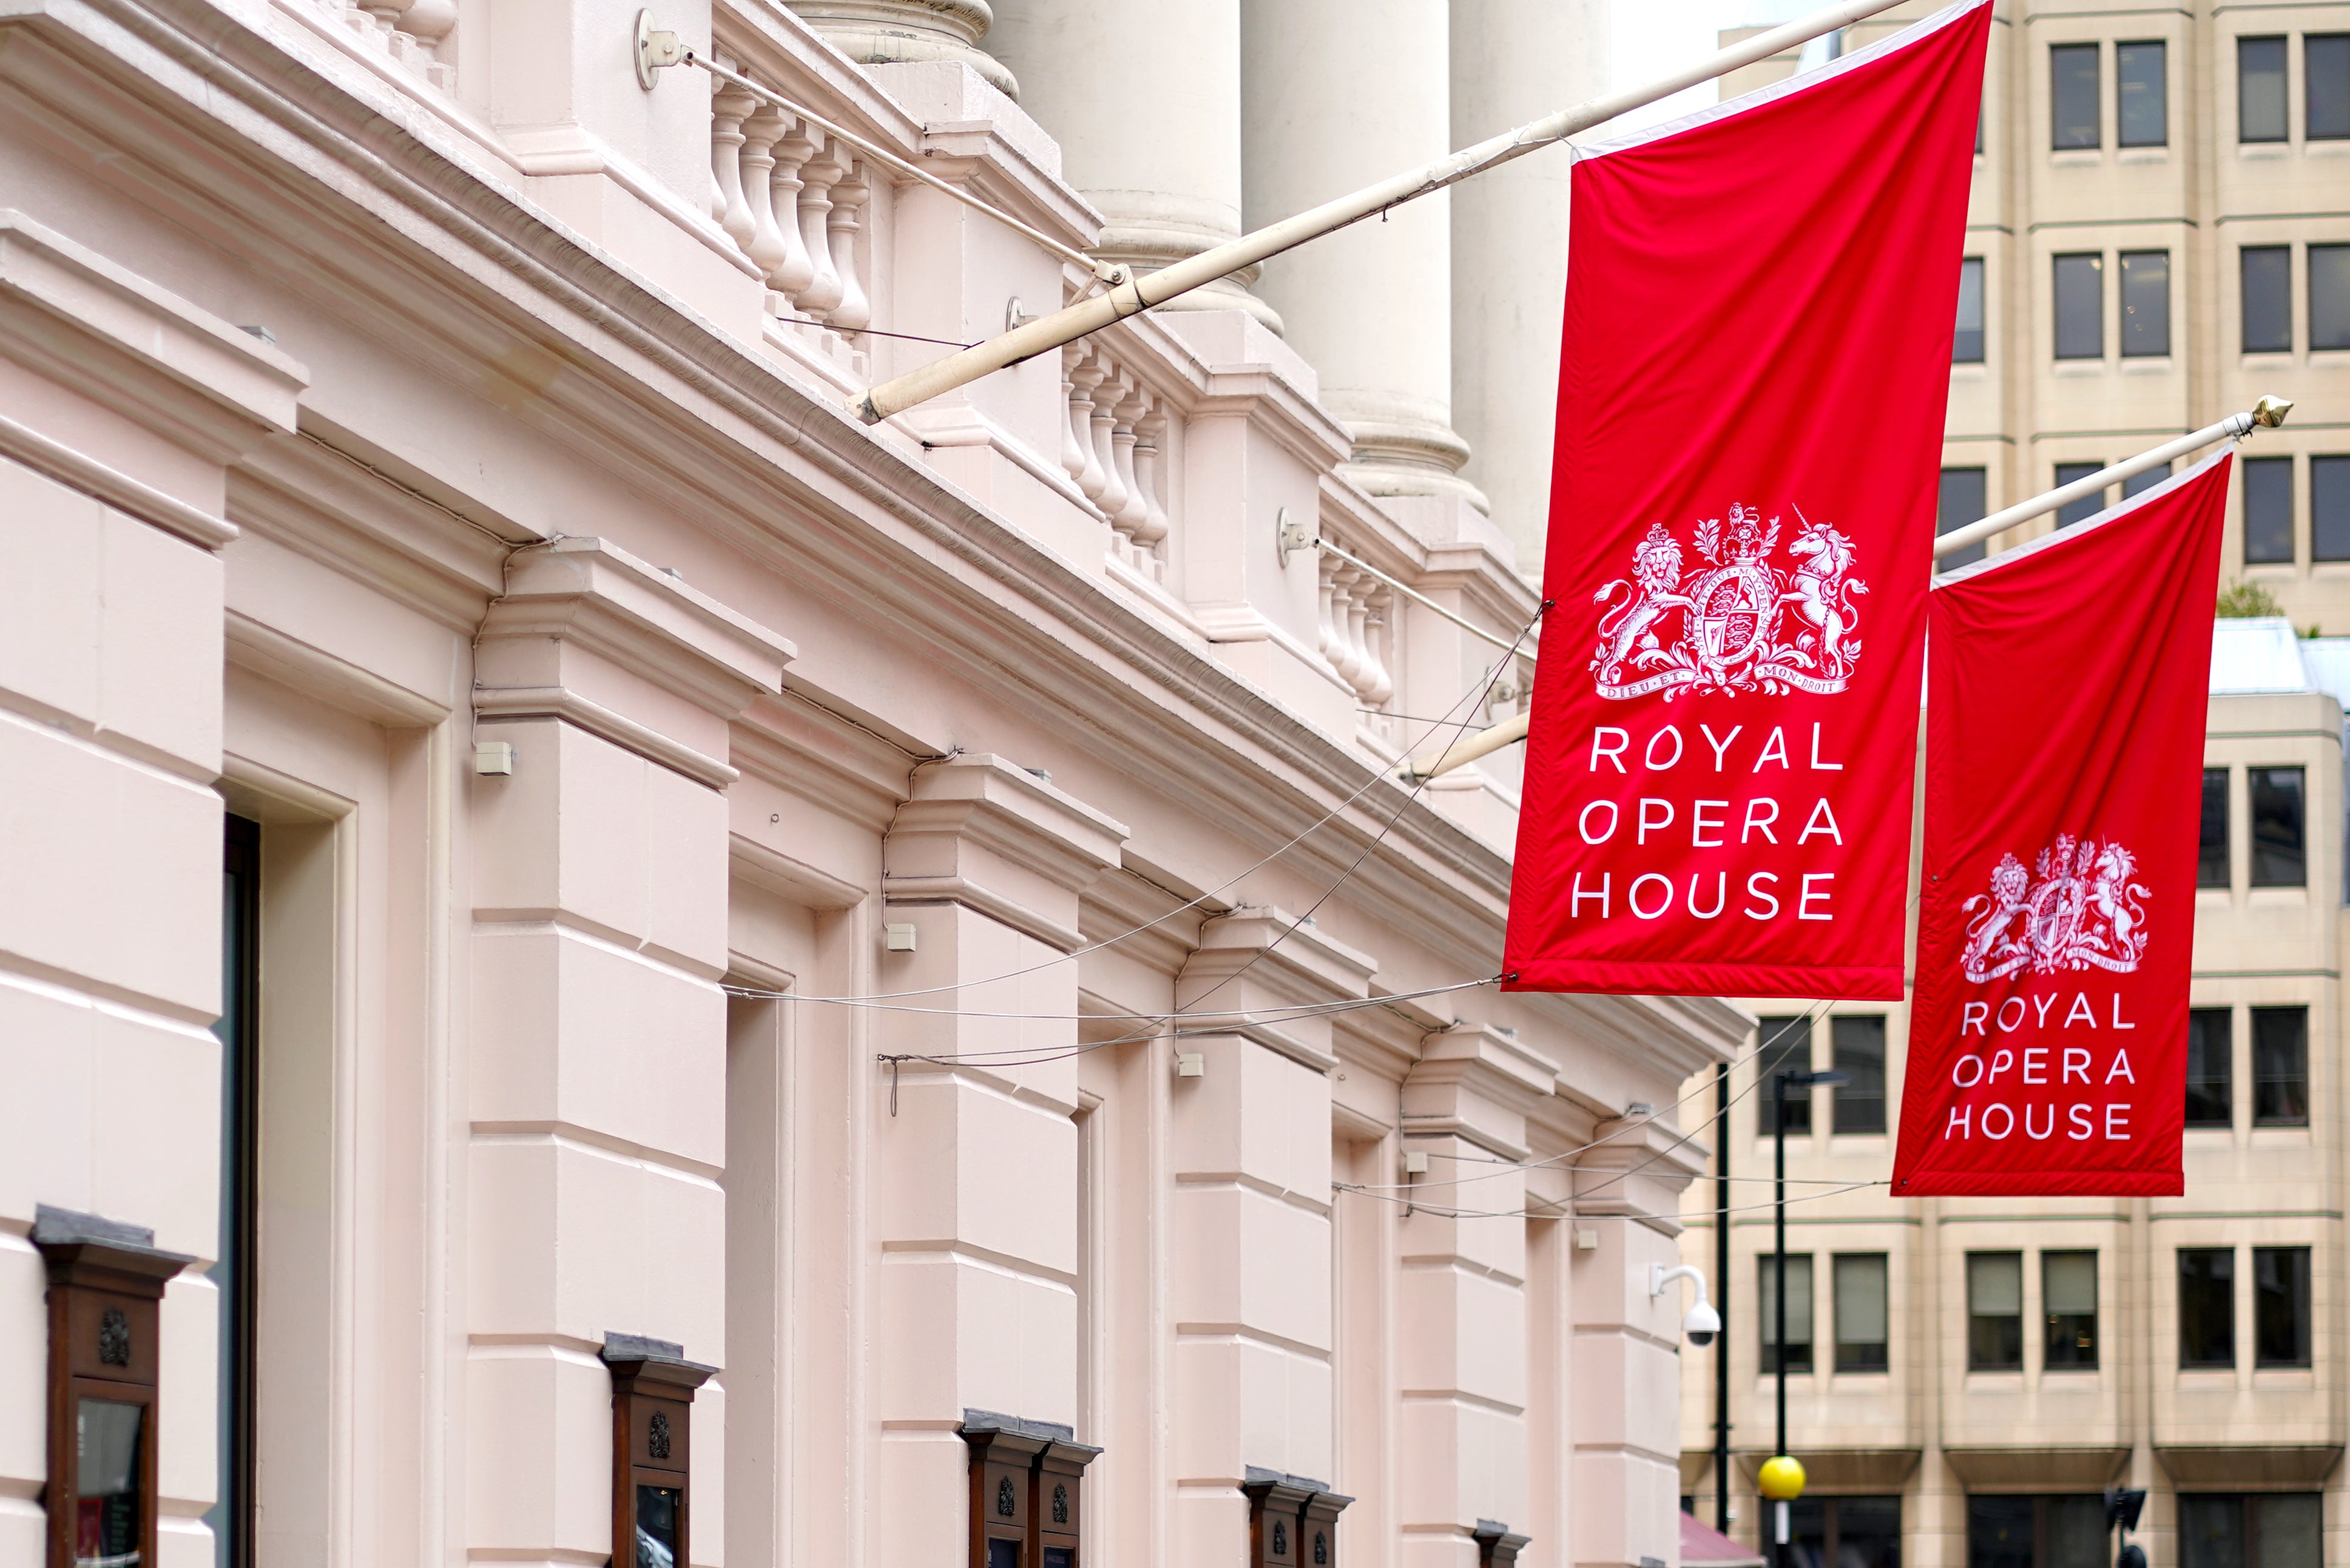 Royal Opera House will now go by its new organisational name, Royal Ballet and Opera